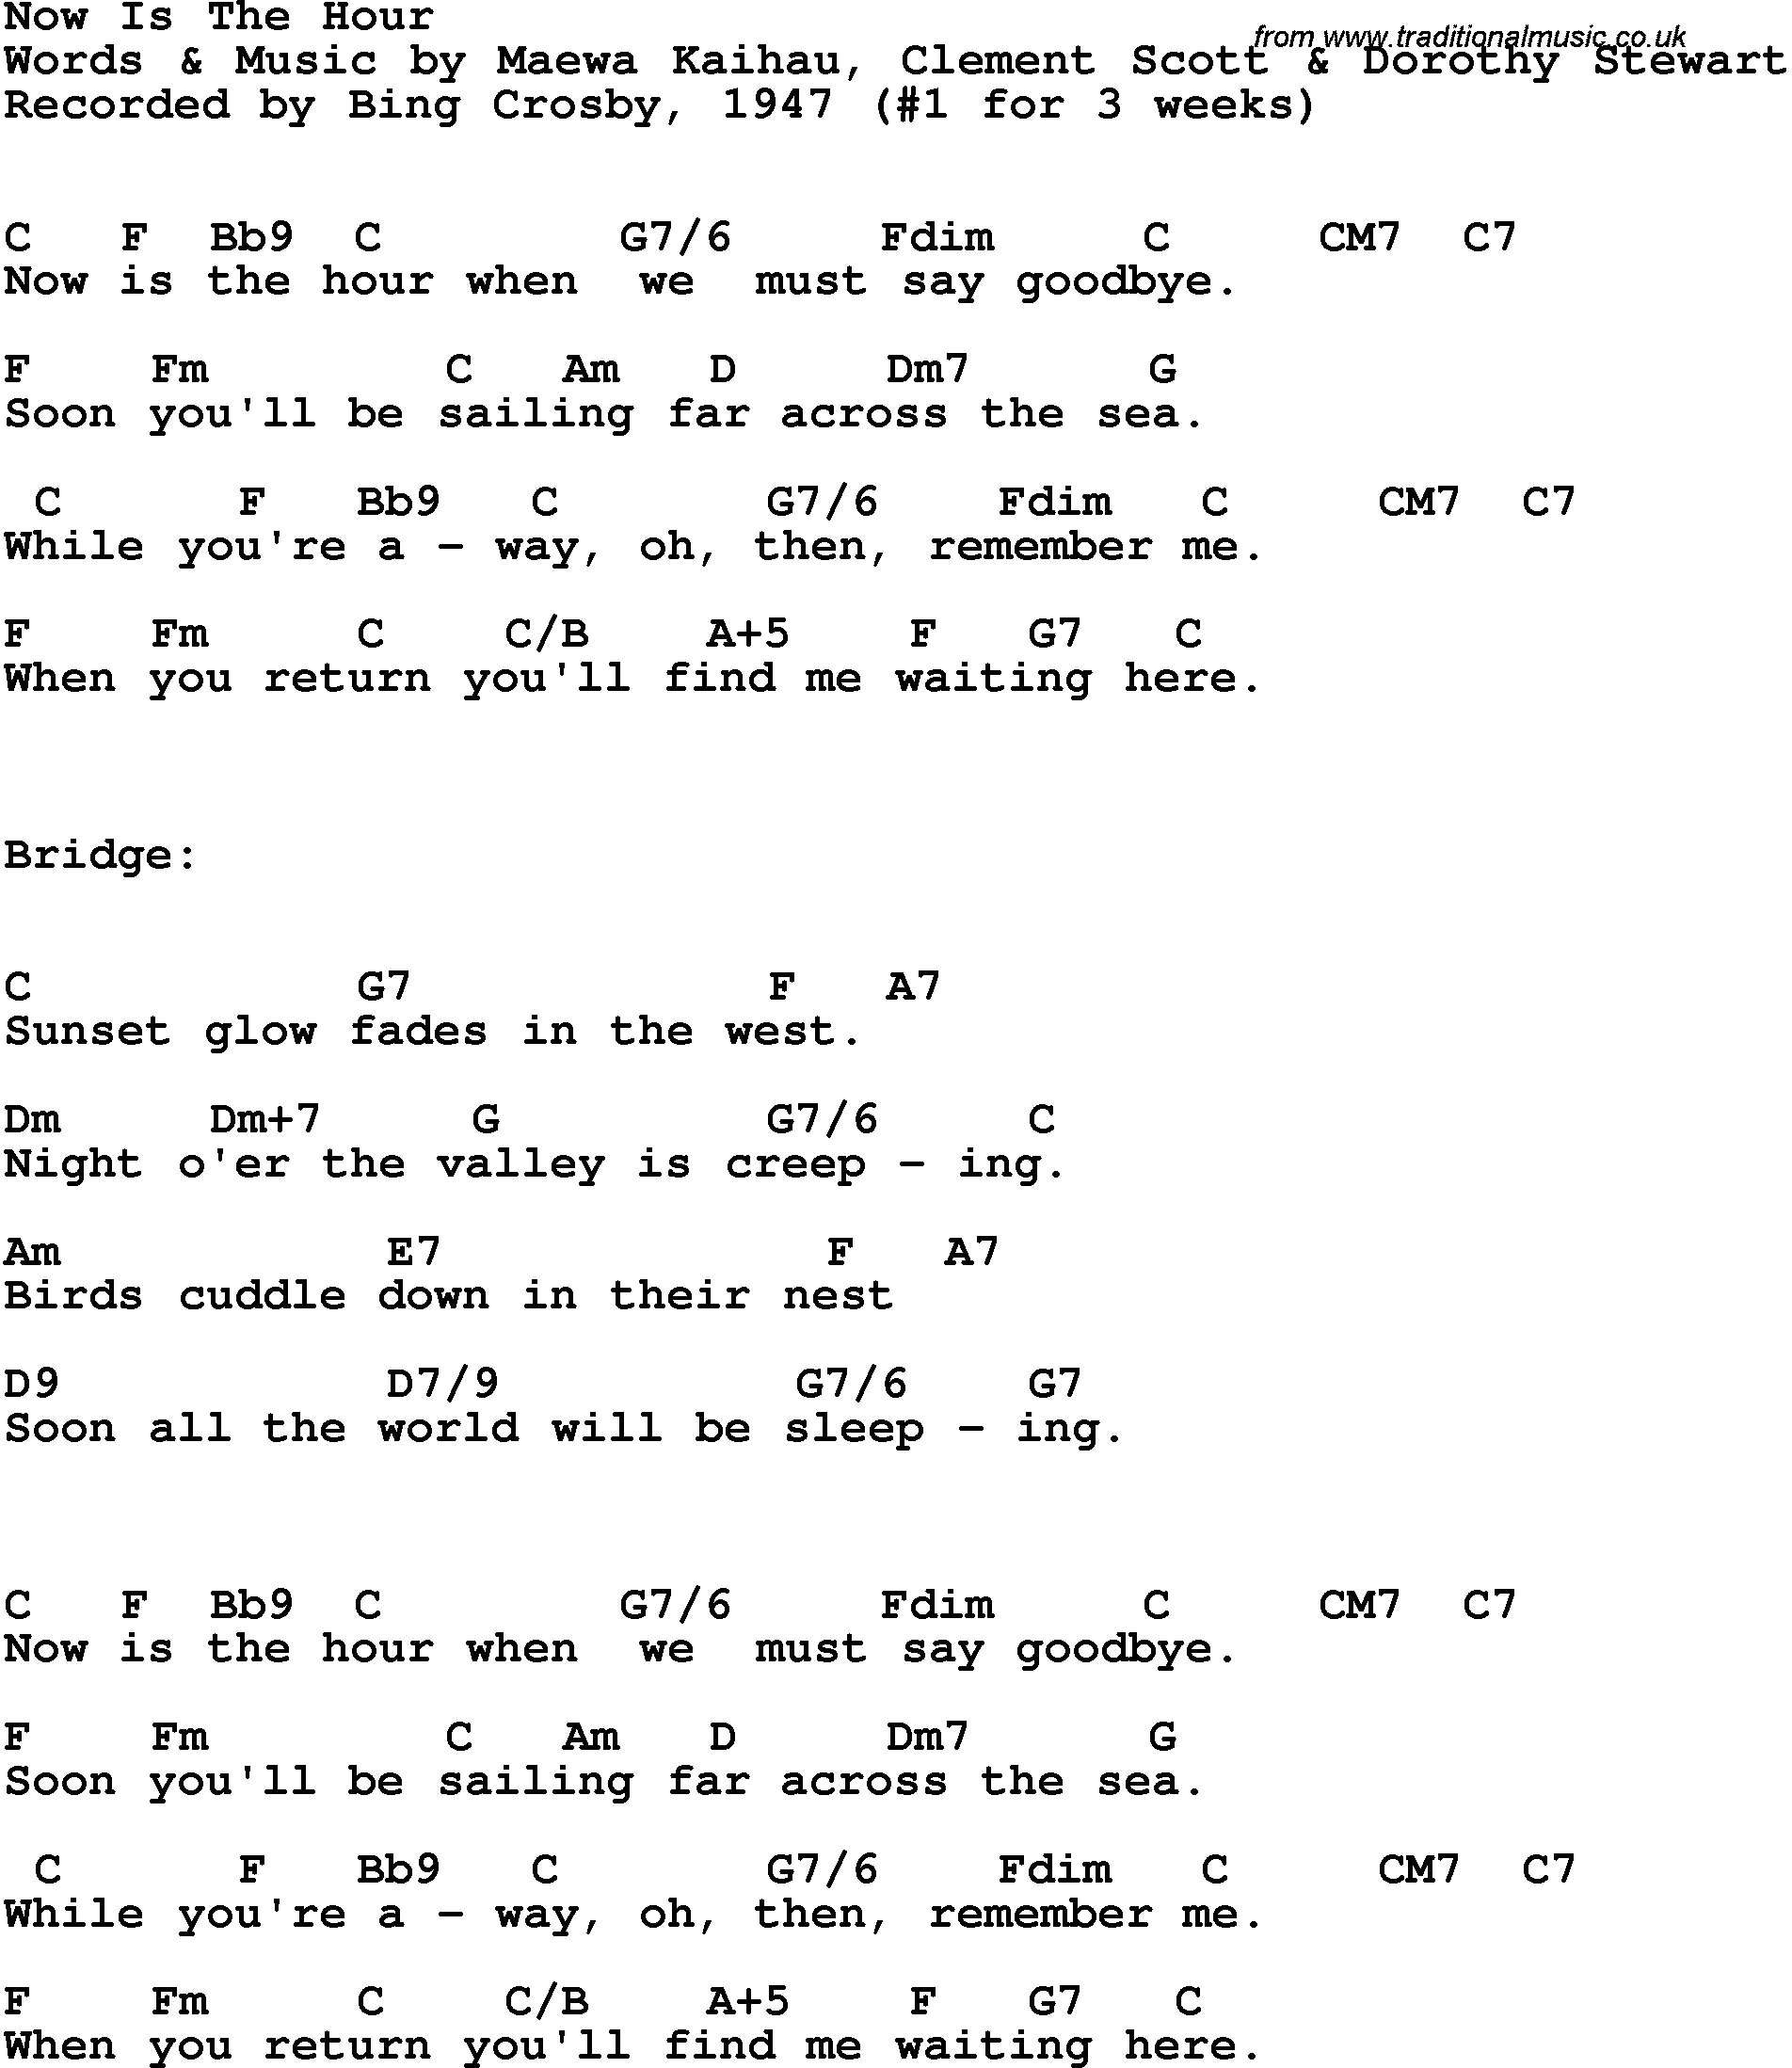 Song Lyrics with guitar chords for Now Is The Hour - Bing Crosby, 1947